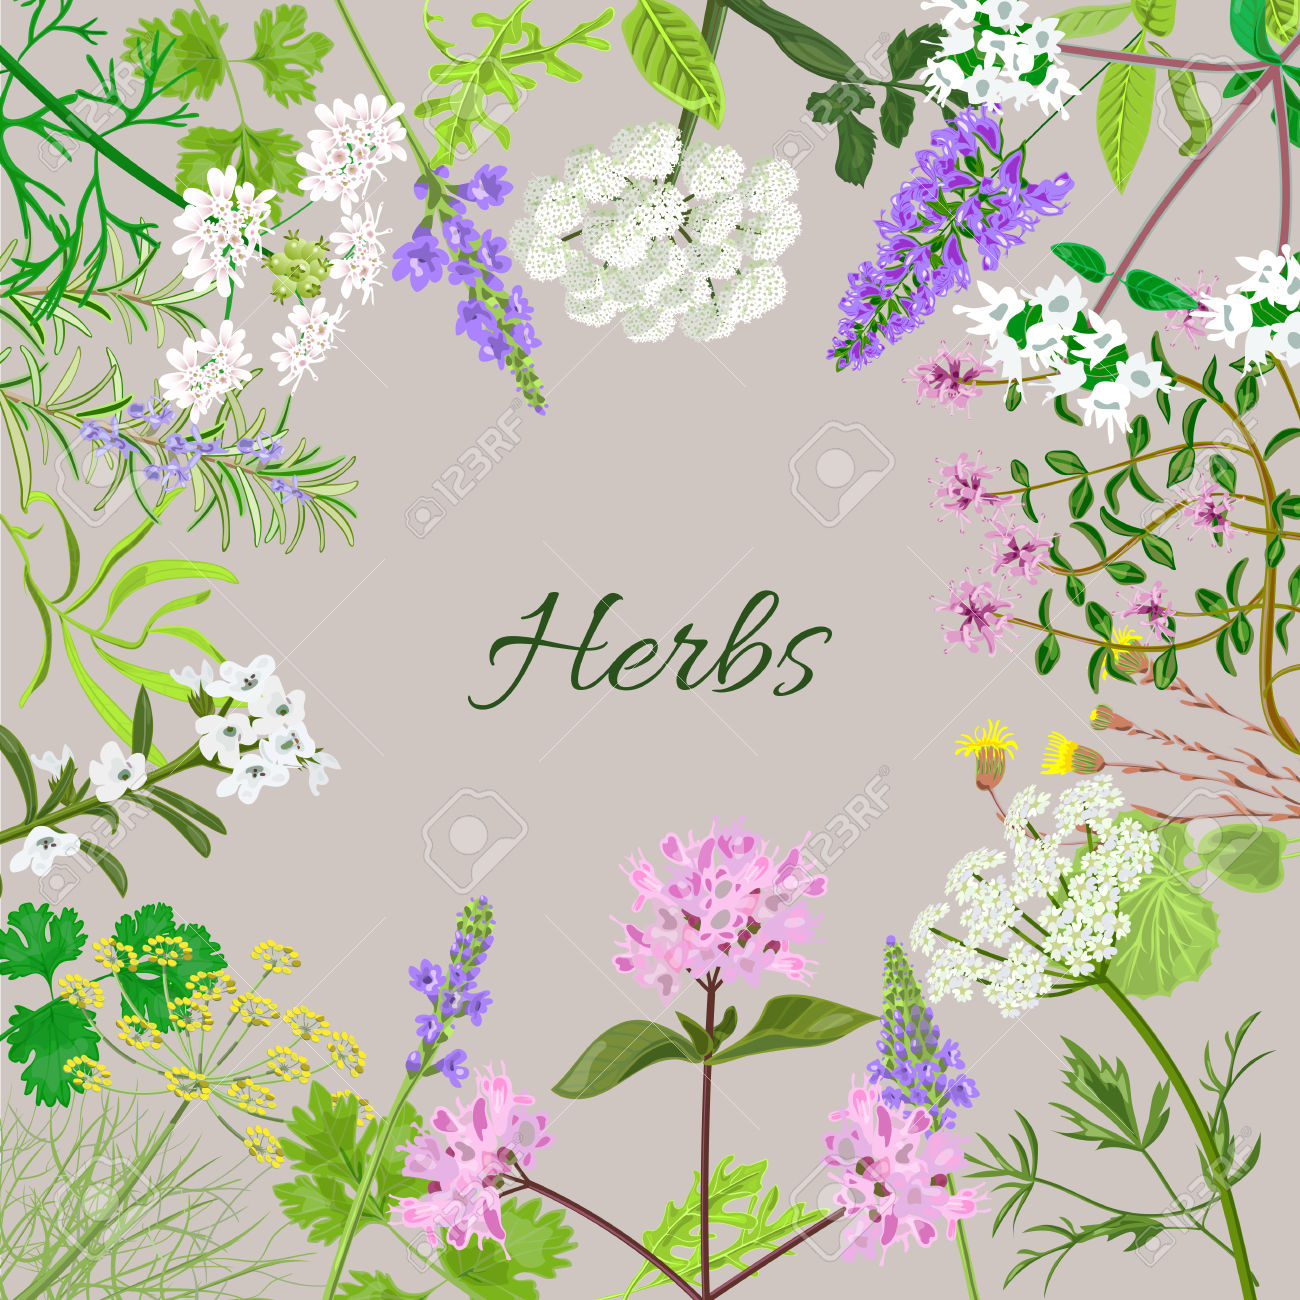 Vector Card With Herbal Flowers. Salvia, Angelica, Oregano.